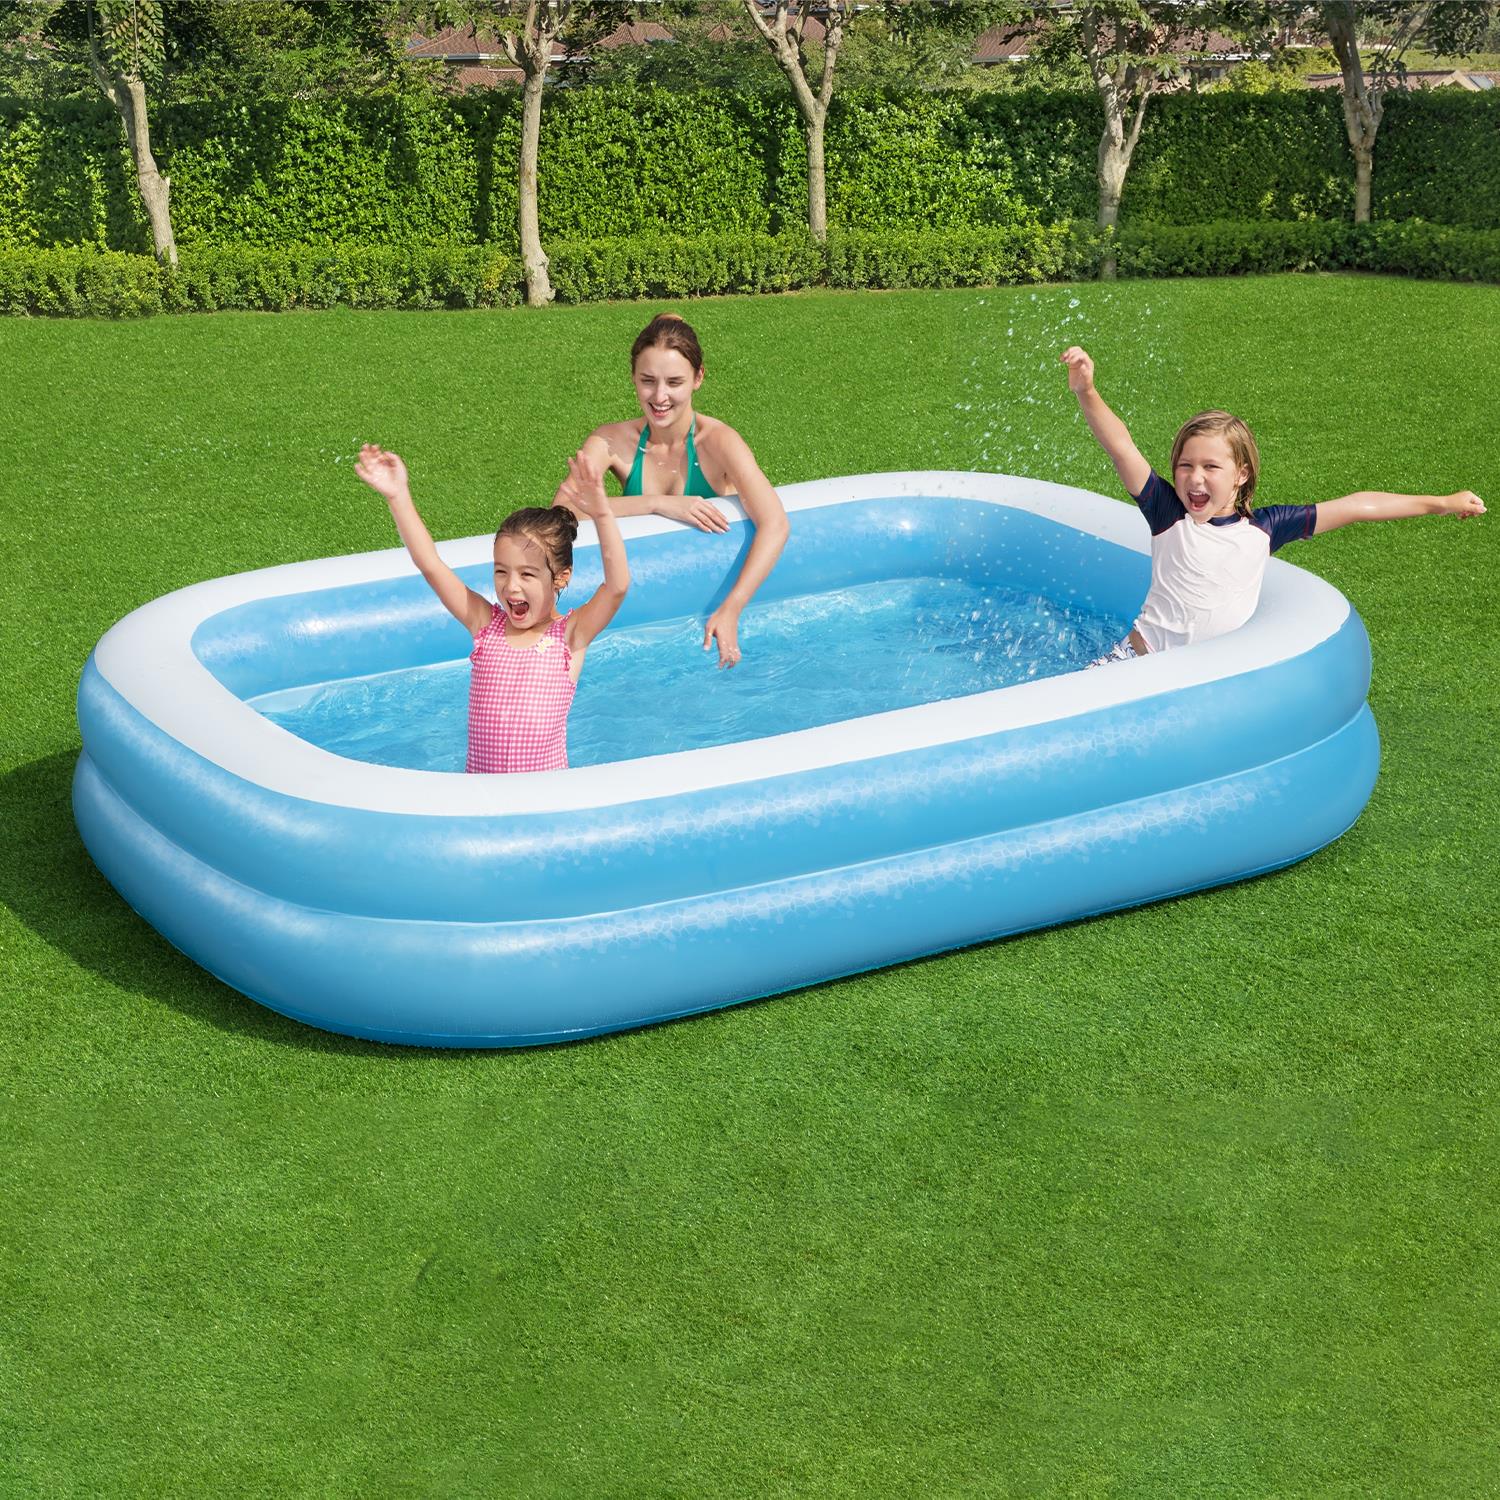 Bestway Inflatable Family Rectangular Pool with Repair Patch, 2.62mx1.75mx51cm